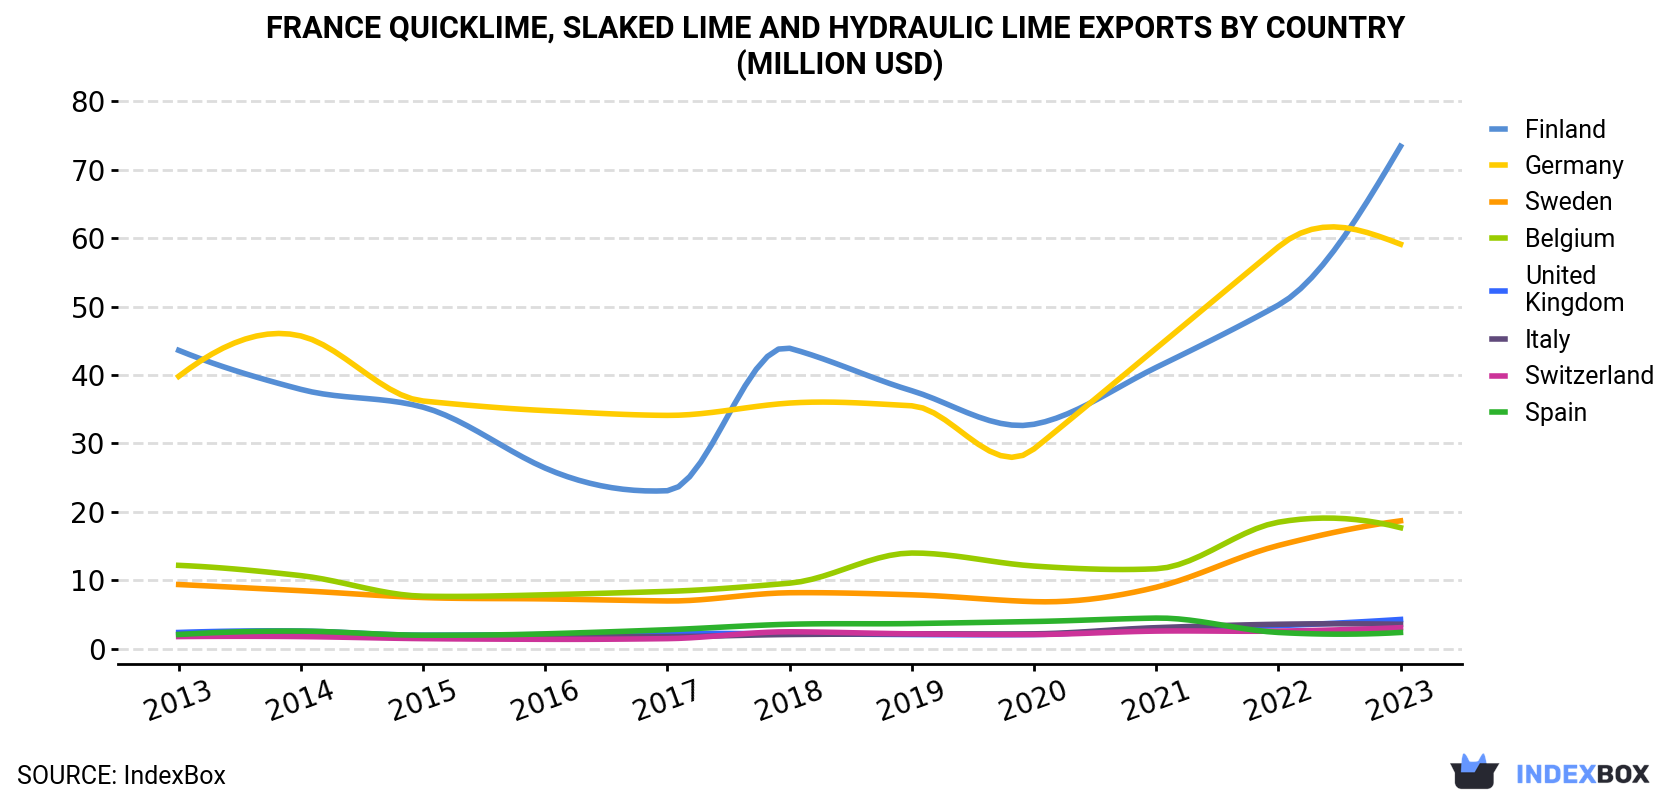 France Quicklime, Slaked Lime and Hydraulic Lime Exports By Country (Million USD)